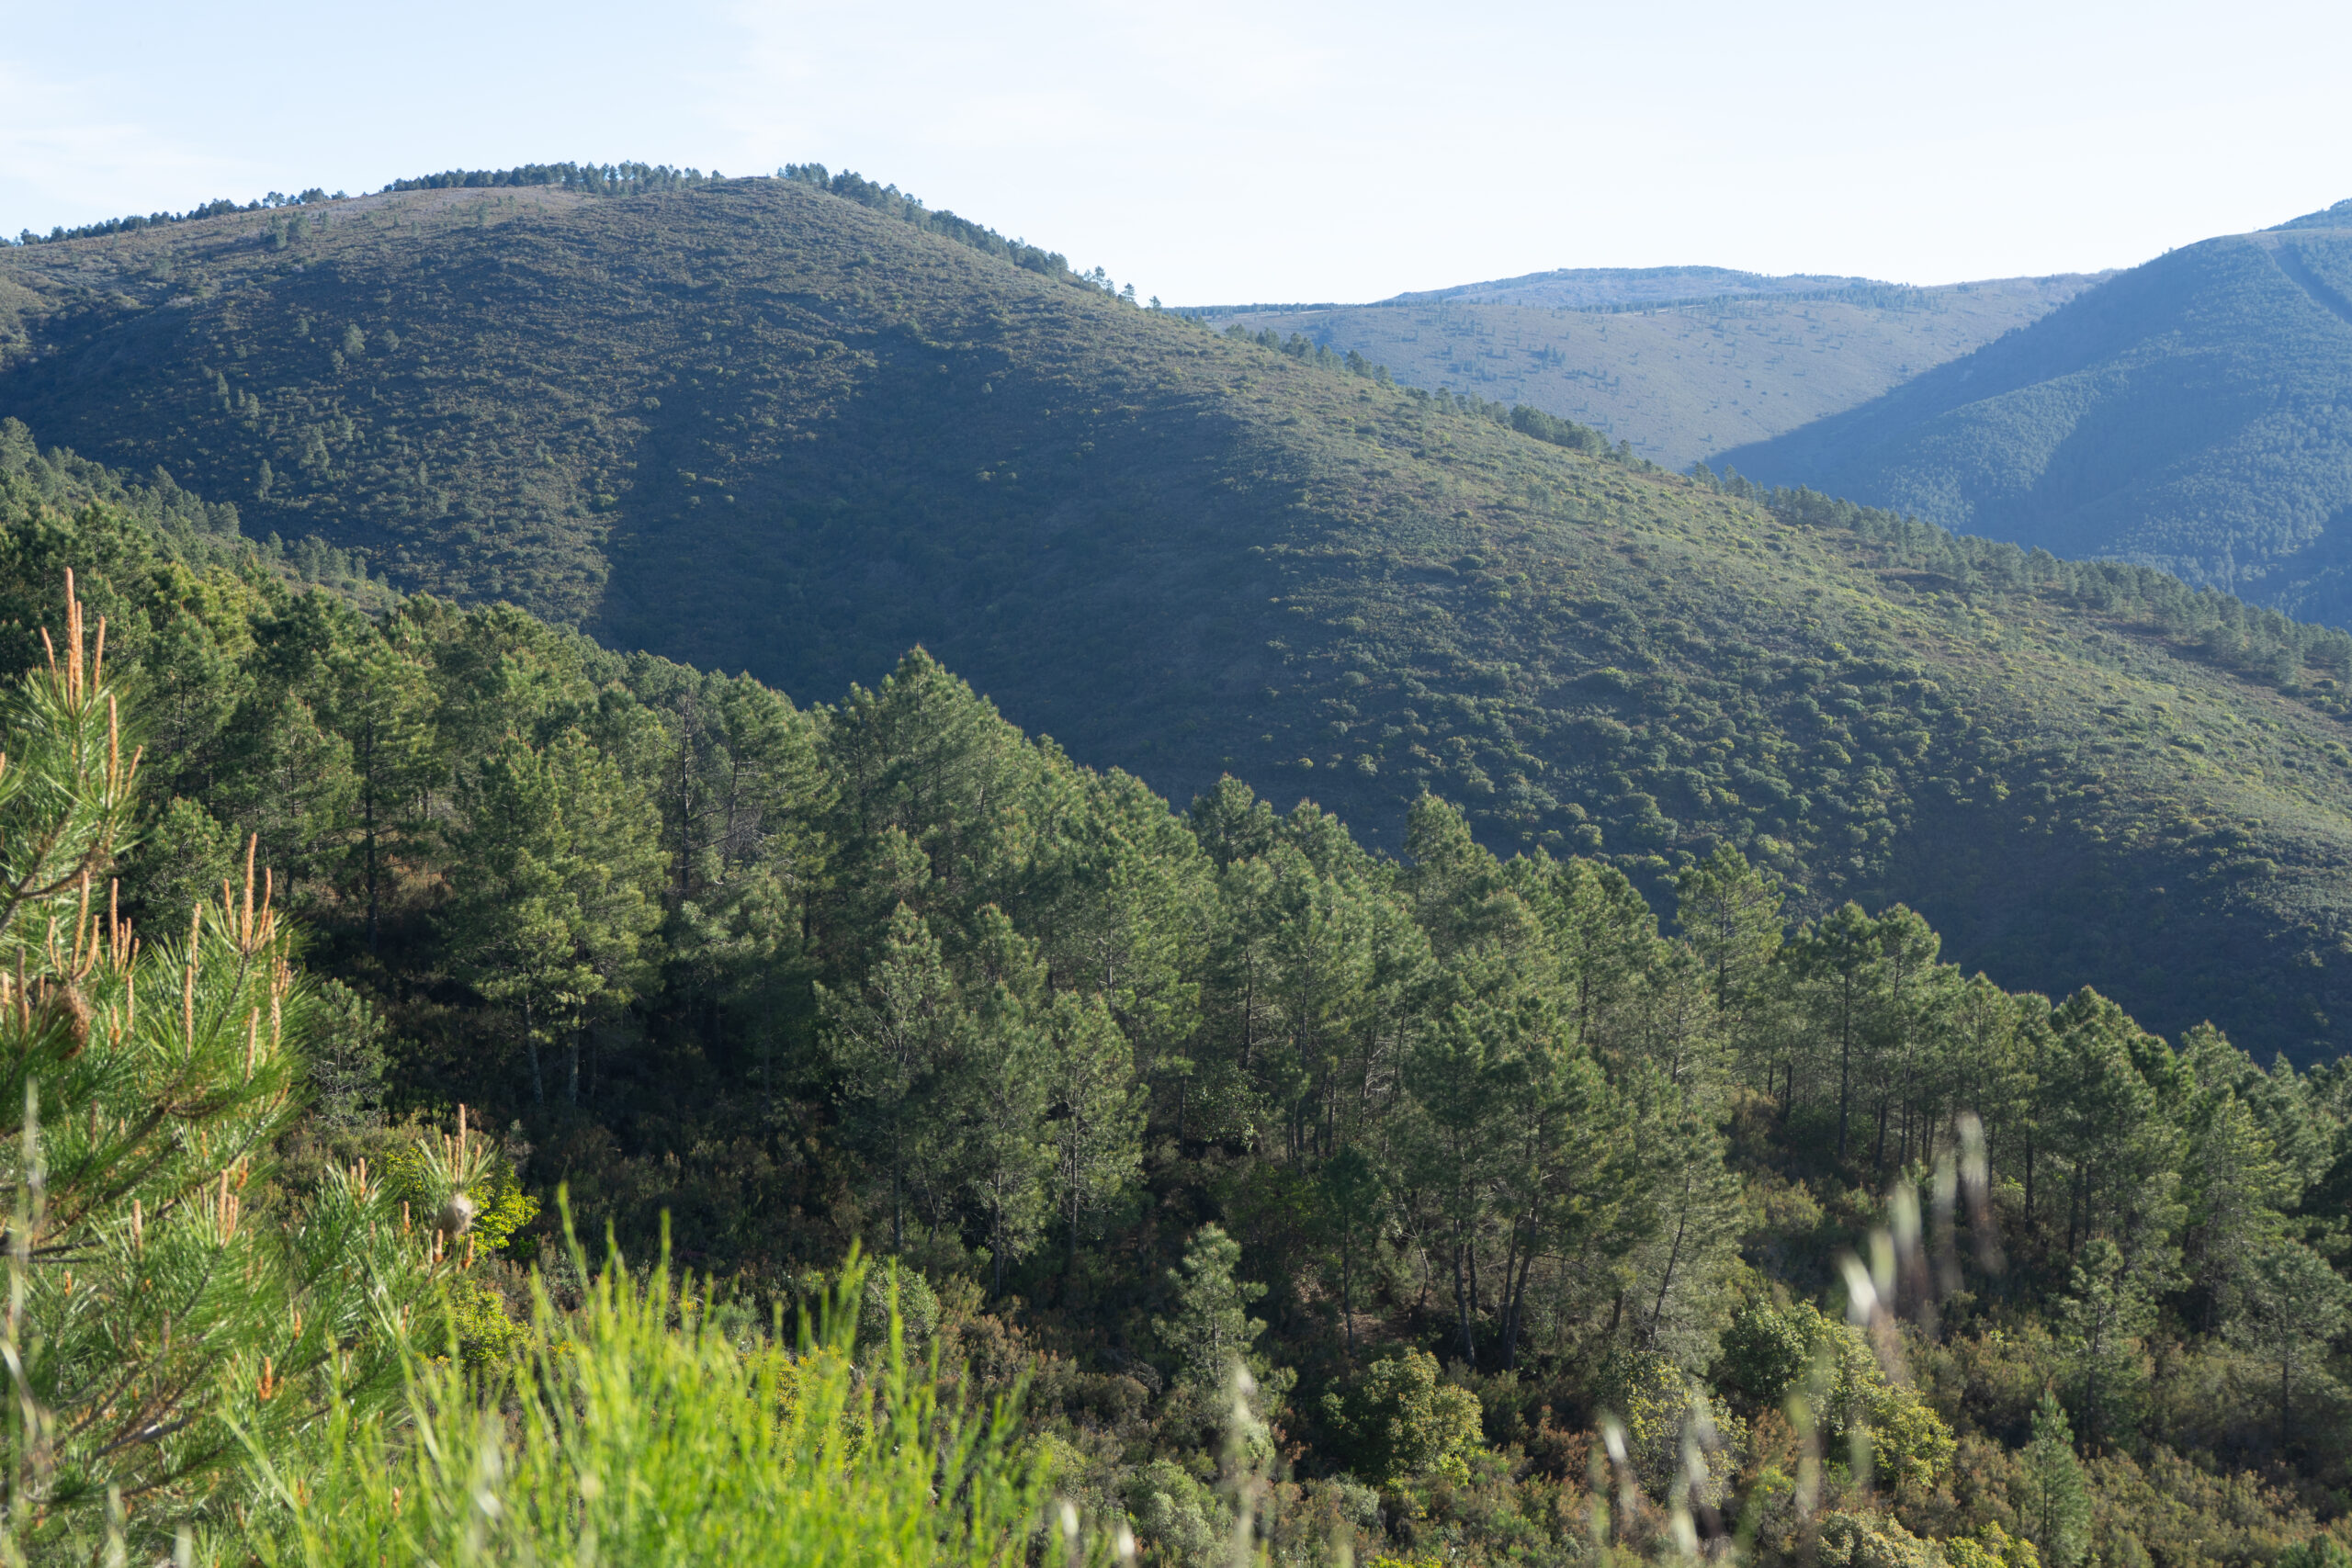 Pine forests cover the landscape in the Sierra de Gata, Extremadura, Spain.